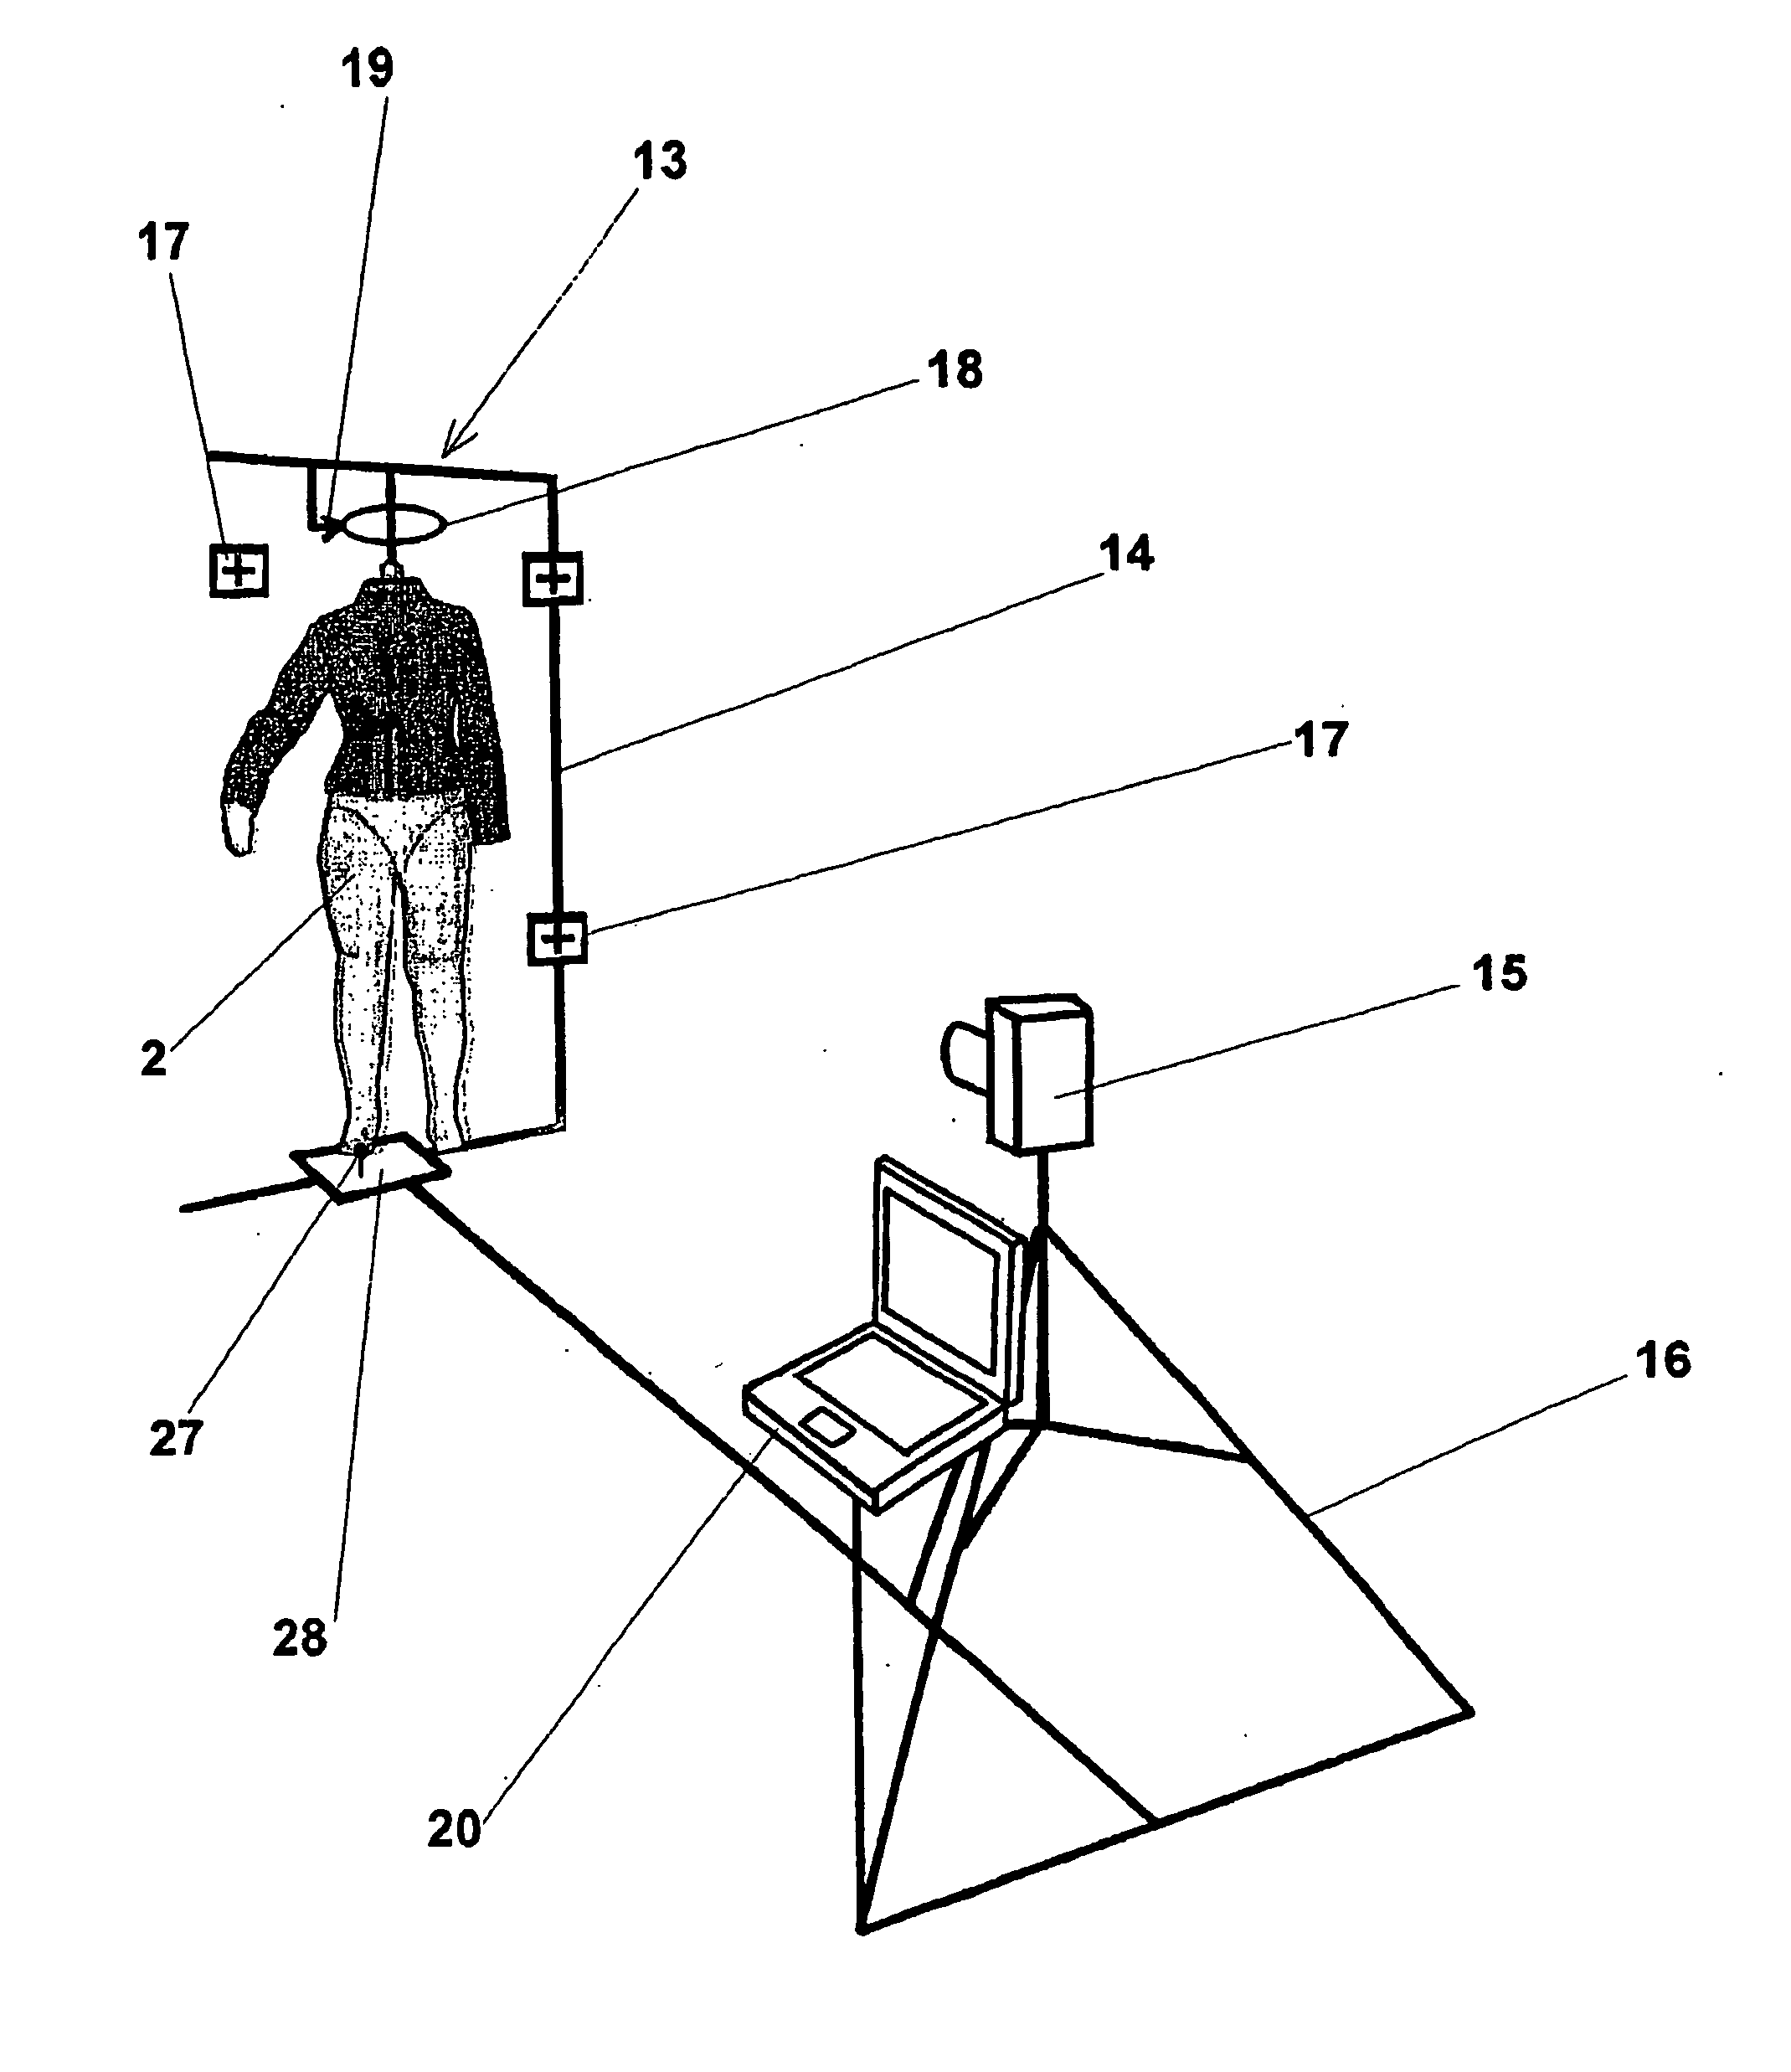 Method and device for viewing, archiving and transmitting a garment model over a computer network